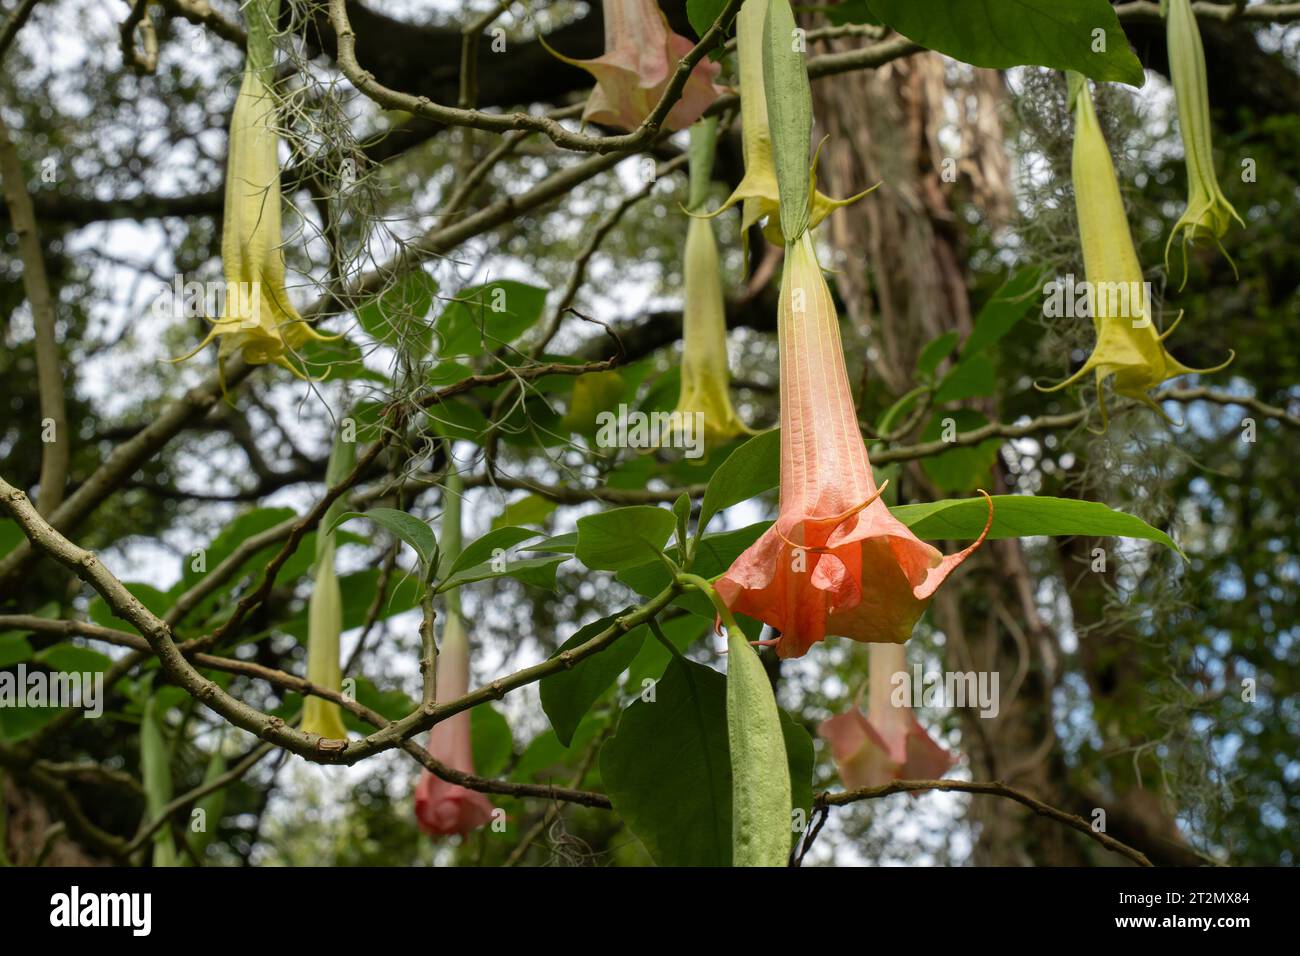 The pendulous flowers of the Angel's Trumpet (Brugmansia Versicolor), a highly toxic ornamental plant. Stock Photo